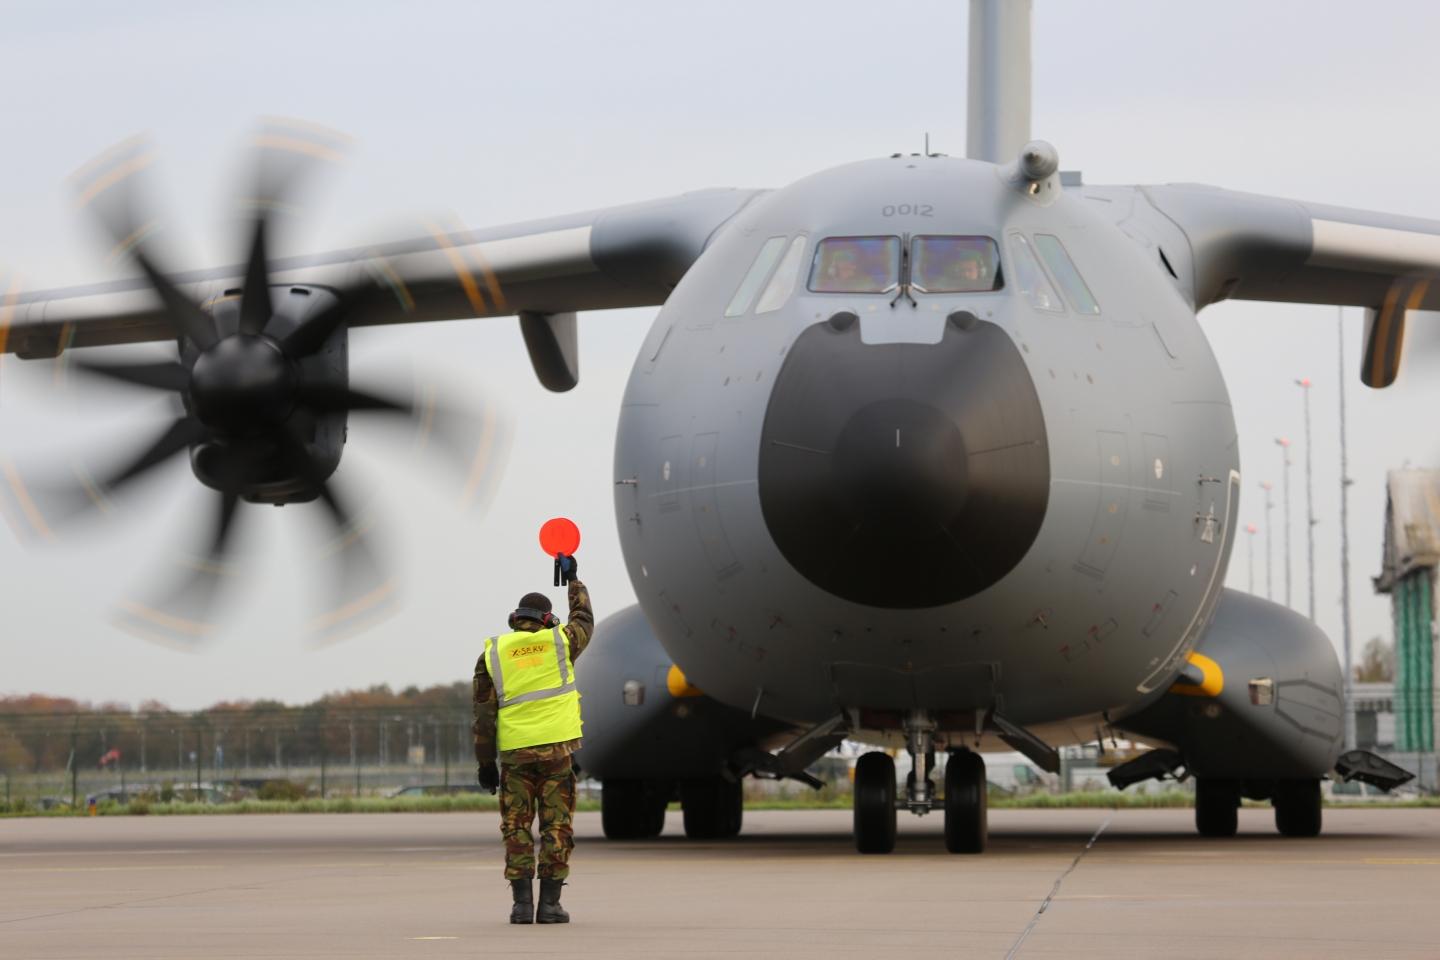 Further OUG meeting for A400M introduction in Wunstorf